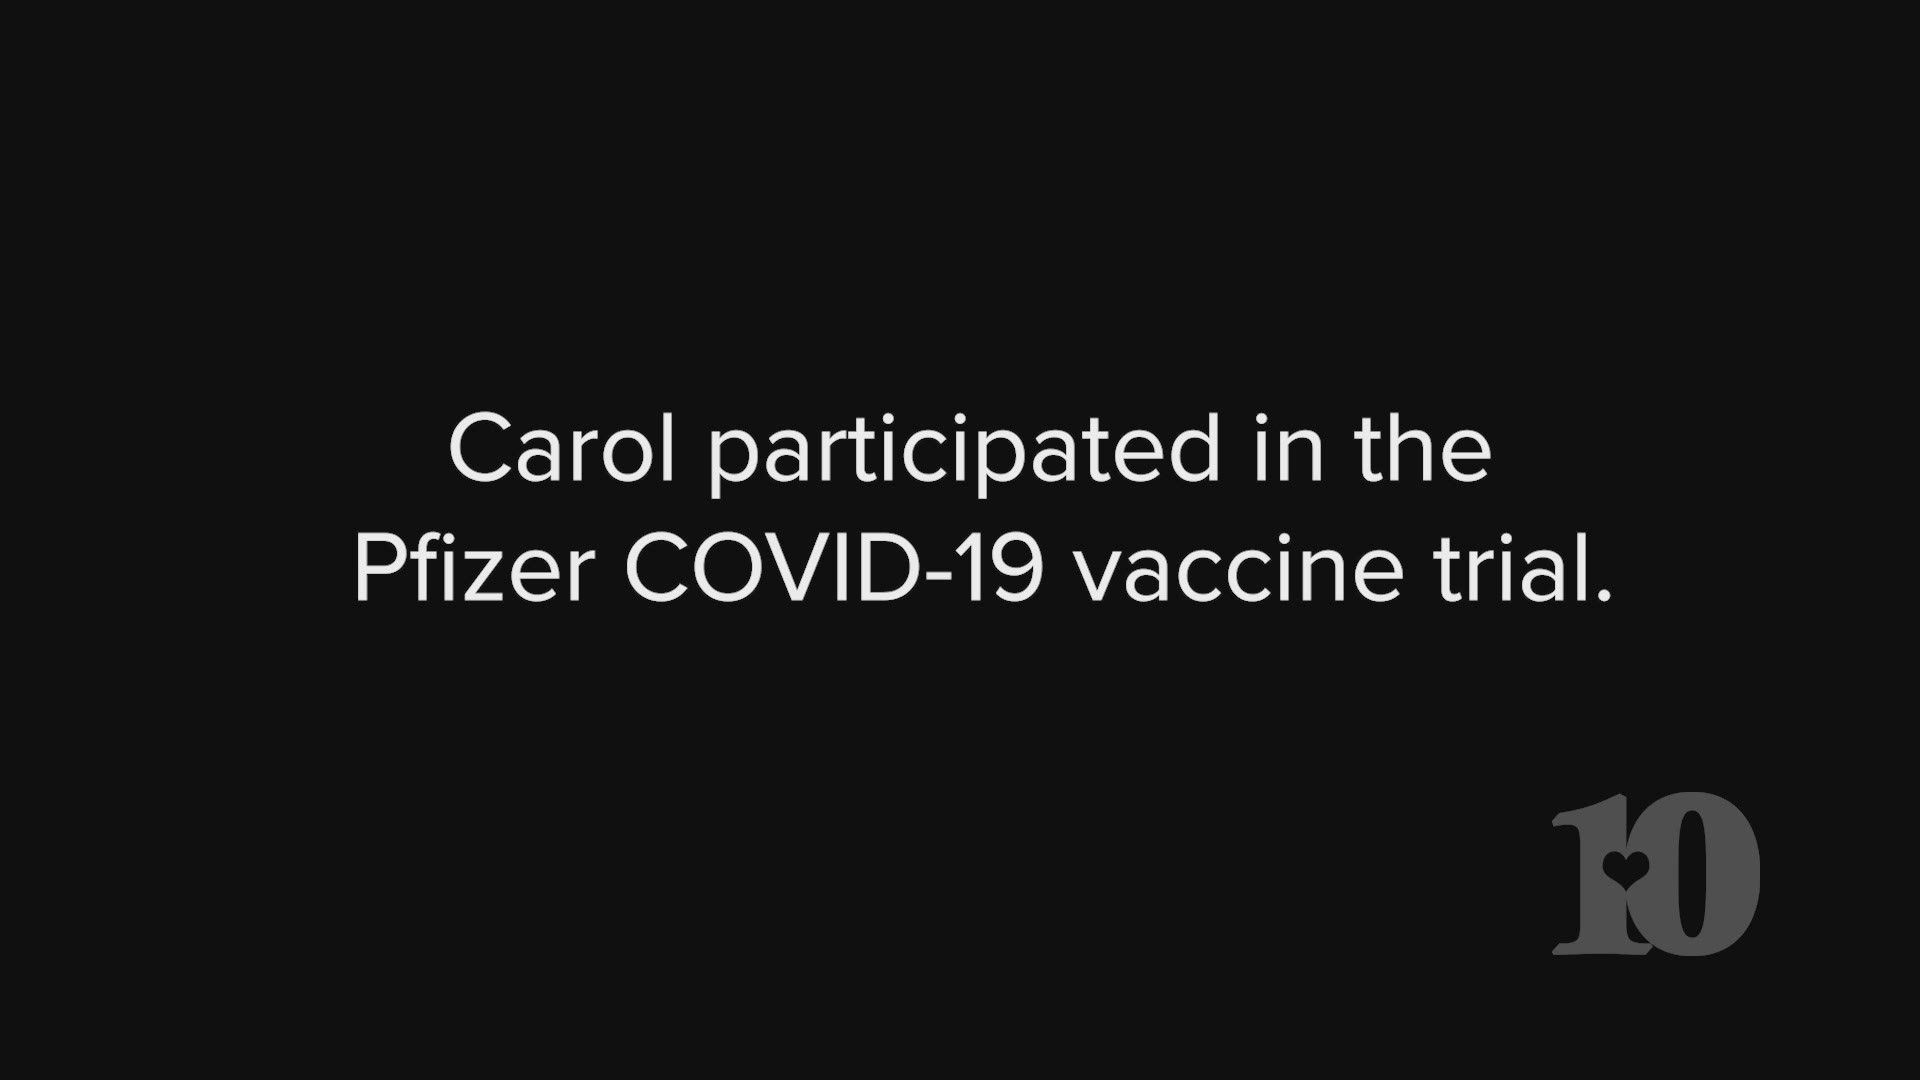 On Monday at 6 p.m., Carol Ottaviano shares her story of getting COVID-19 even though she was vaccinated.